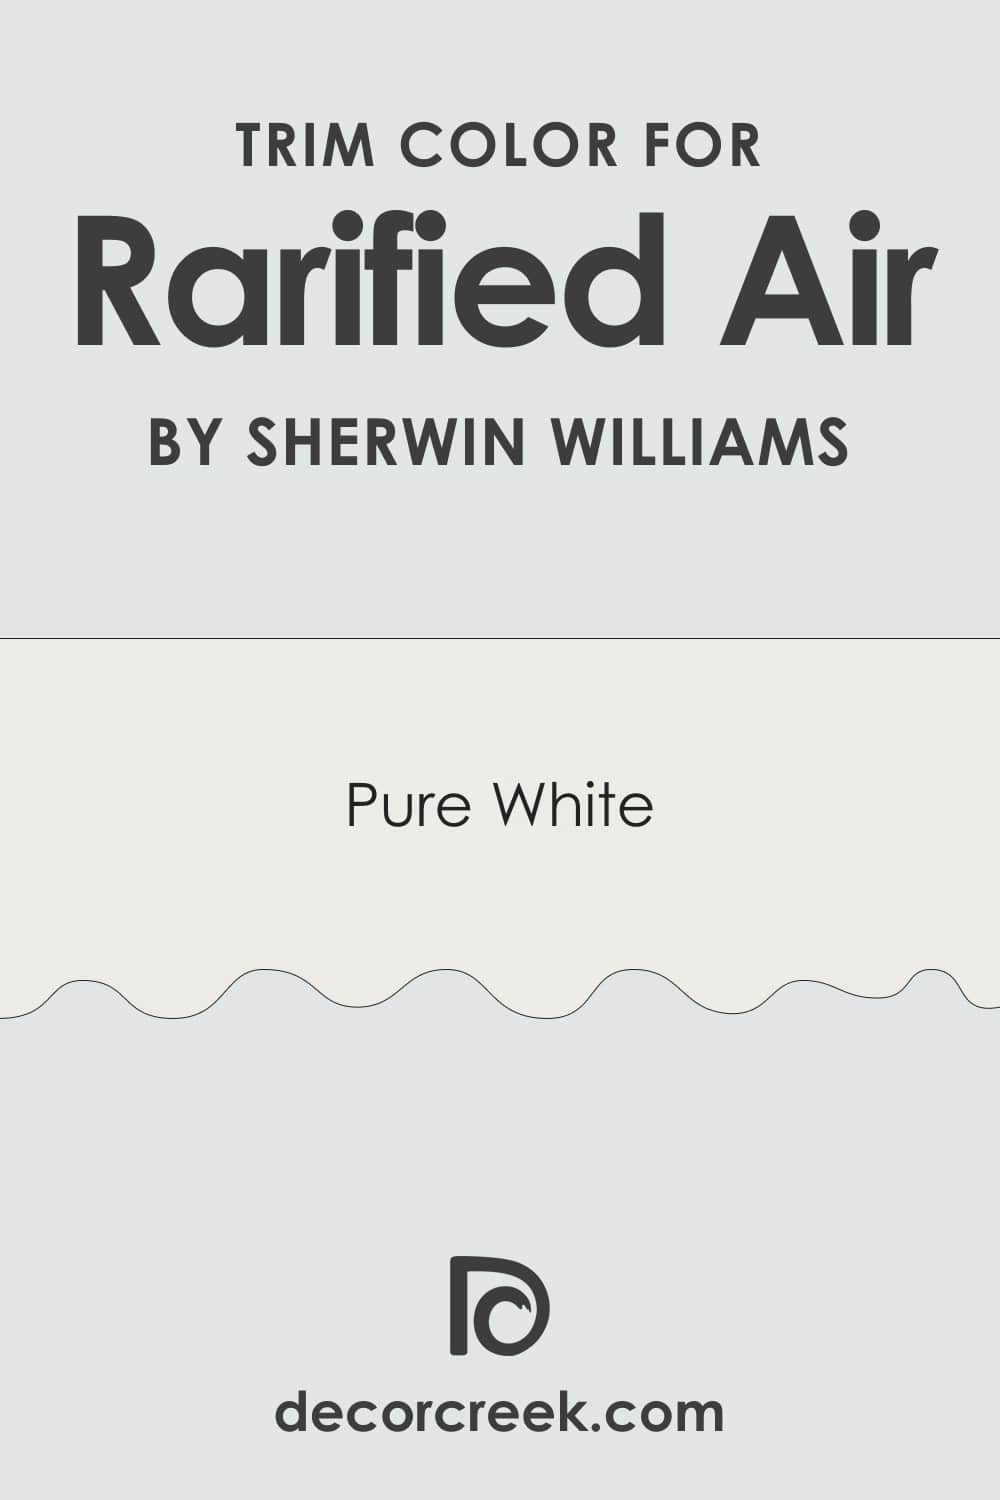 What Is the Best Trim Color For Rarified Air SW-6525 by Sherwin-Williams?